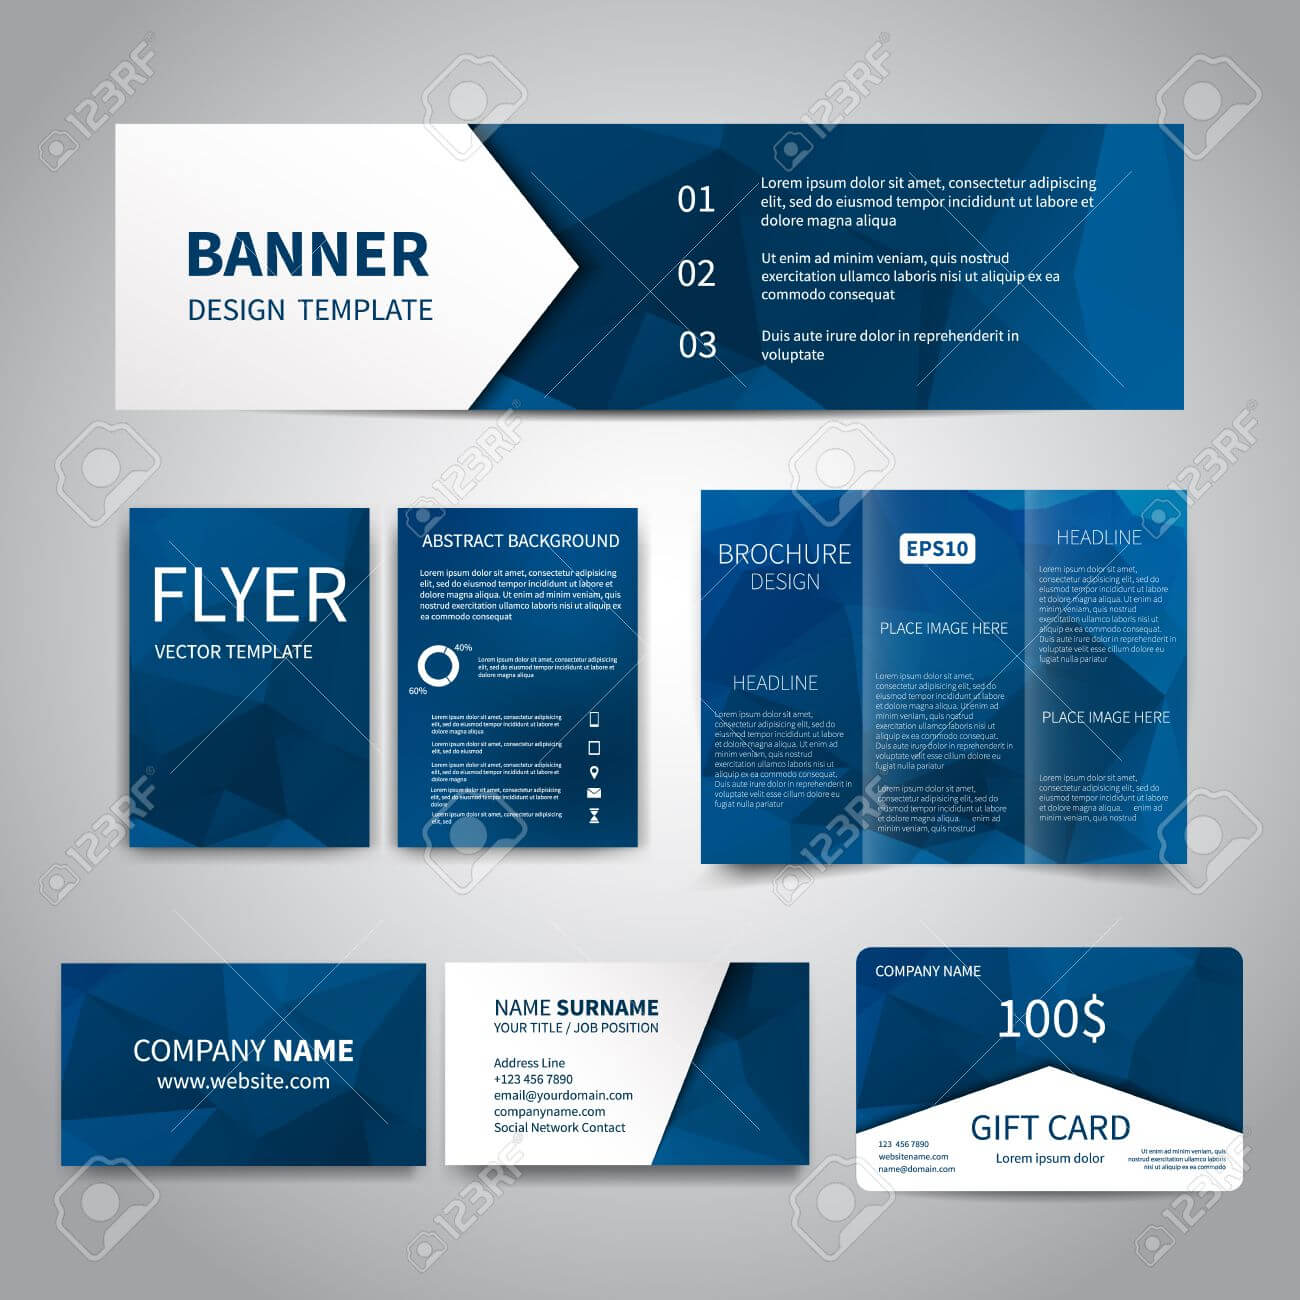 Banner, Flyers, Brochure, Business Cards, Gift Card Design Templates.. Throughout Advertising Cards Templates